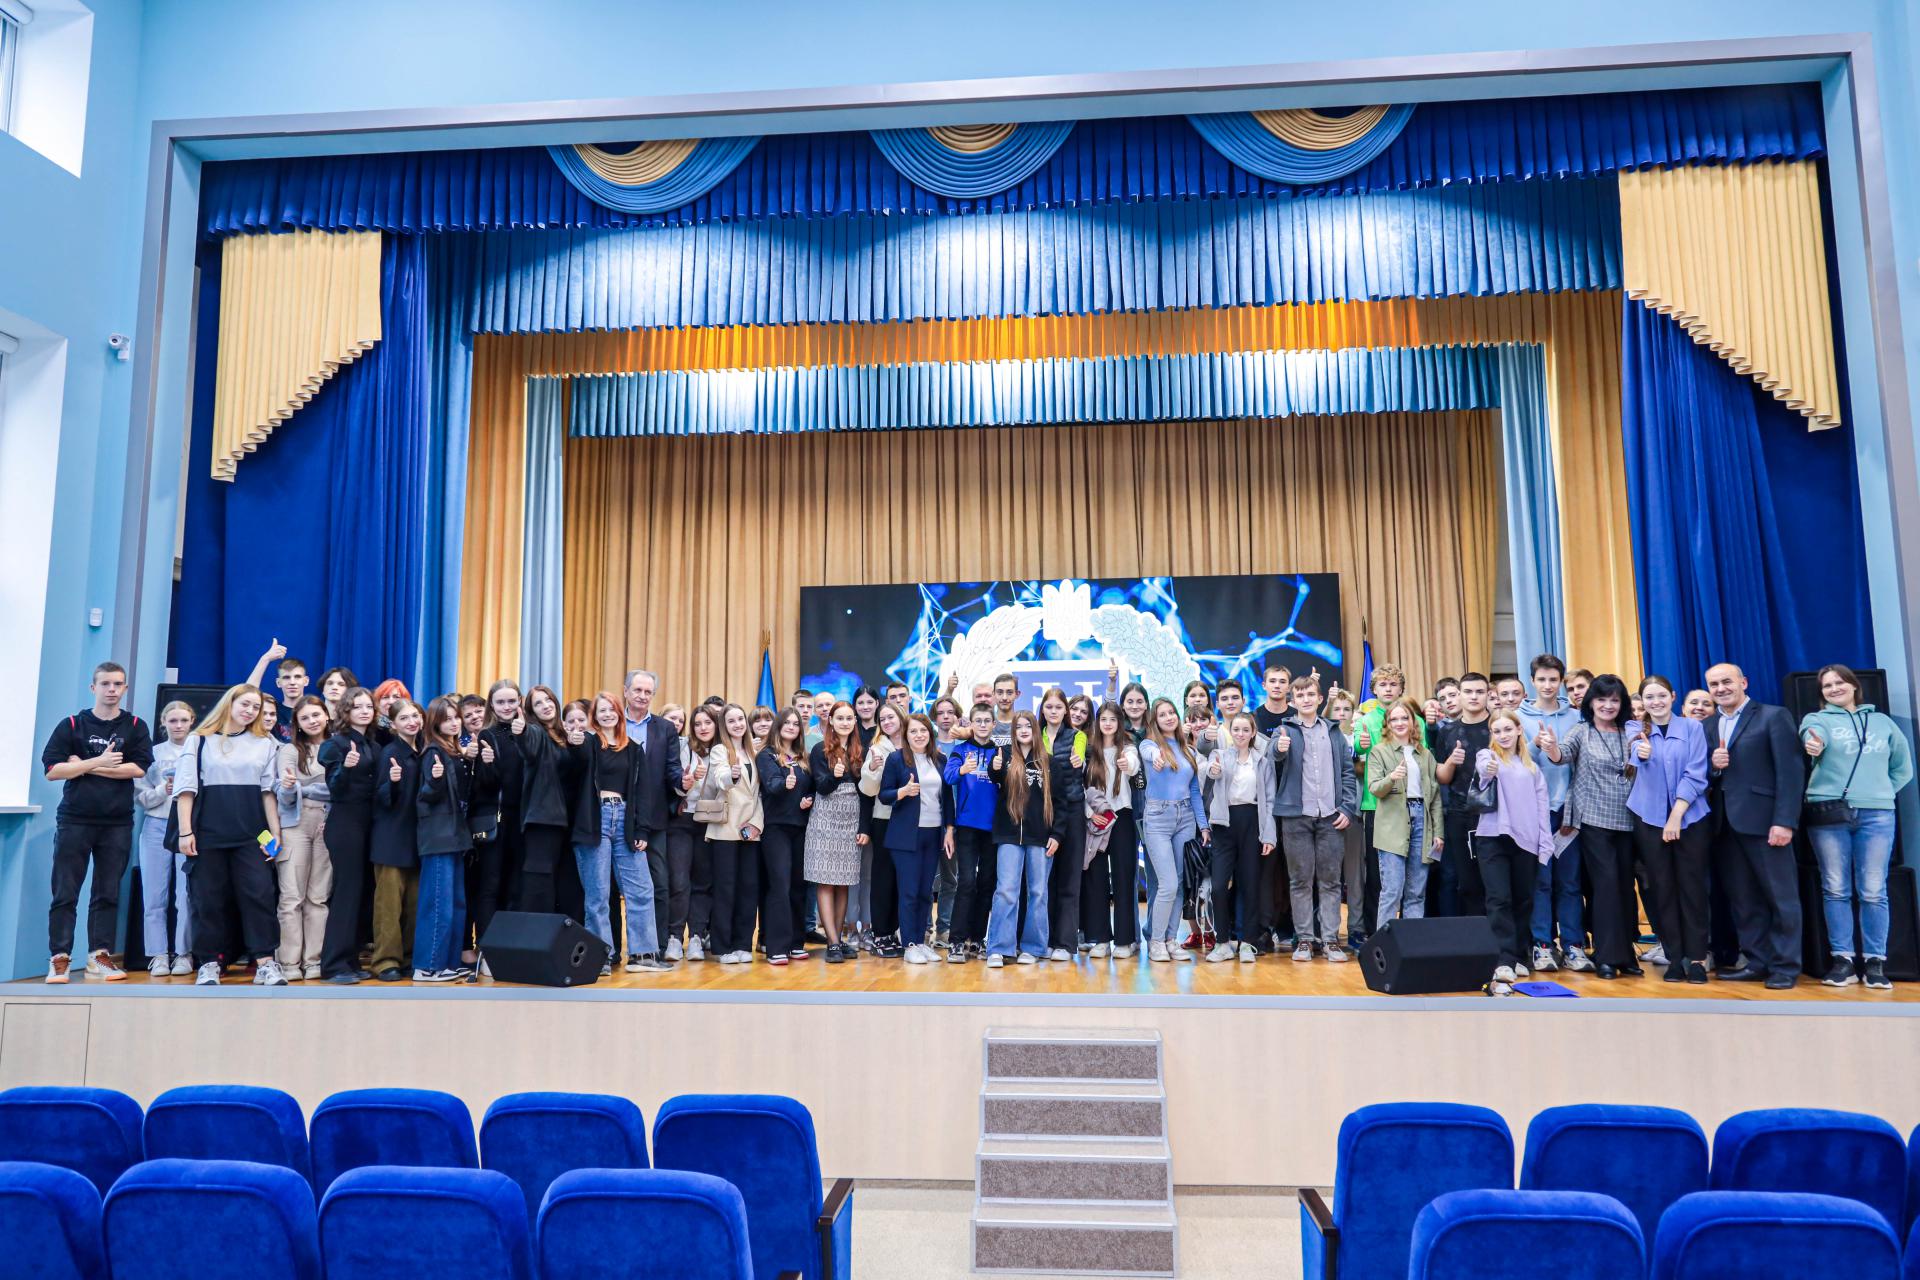 Future entrants learn about the advantages of studying at the Poltava Polytechnic